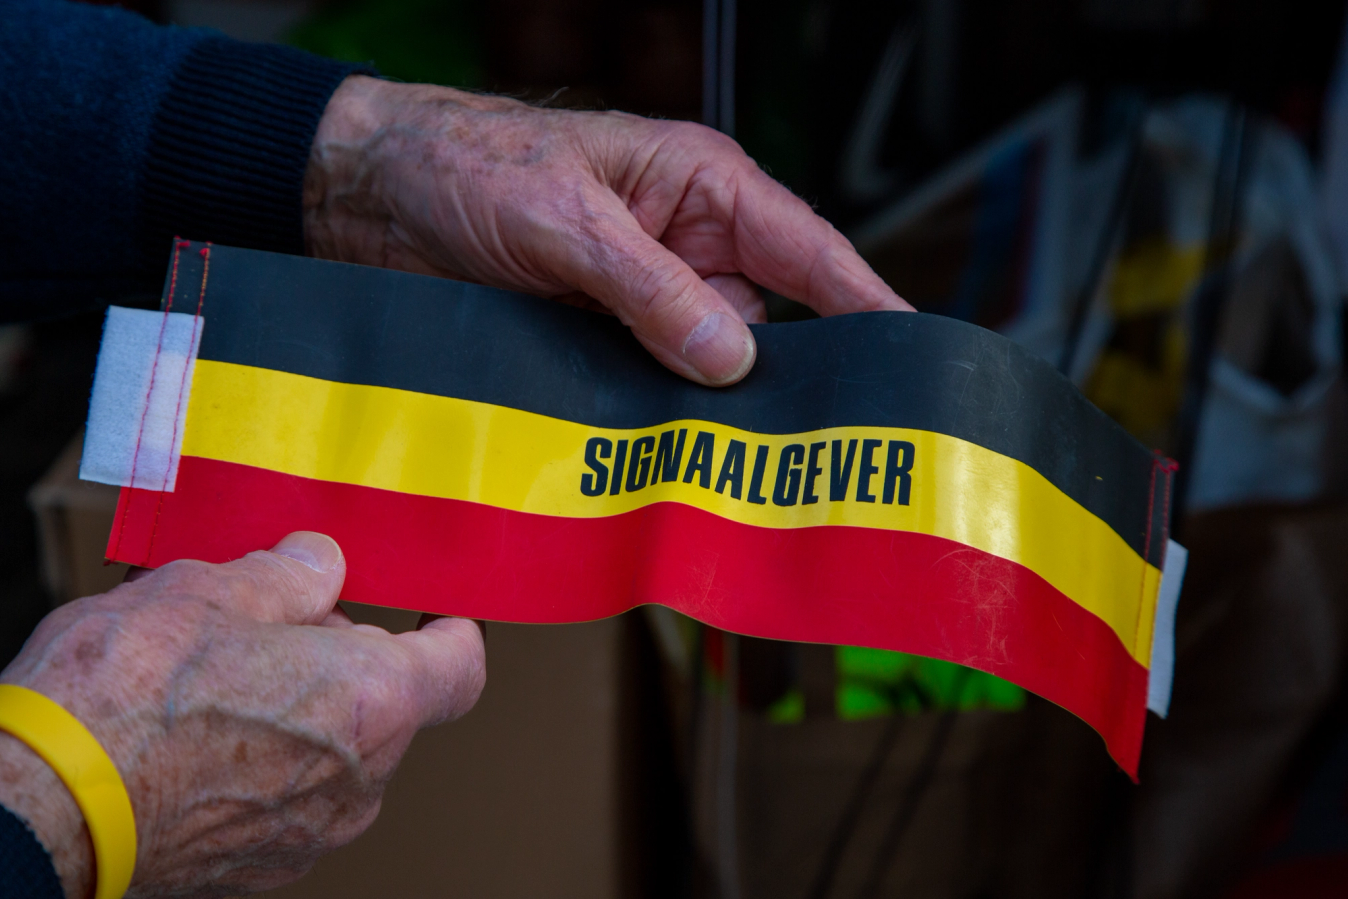 Lucien’s signaller armband, bearing the colours of the Belgian flag